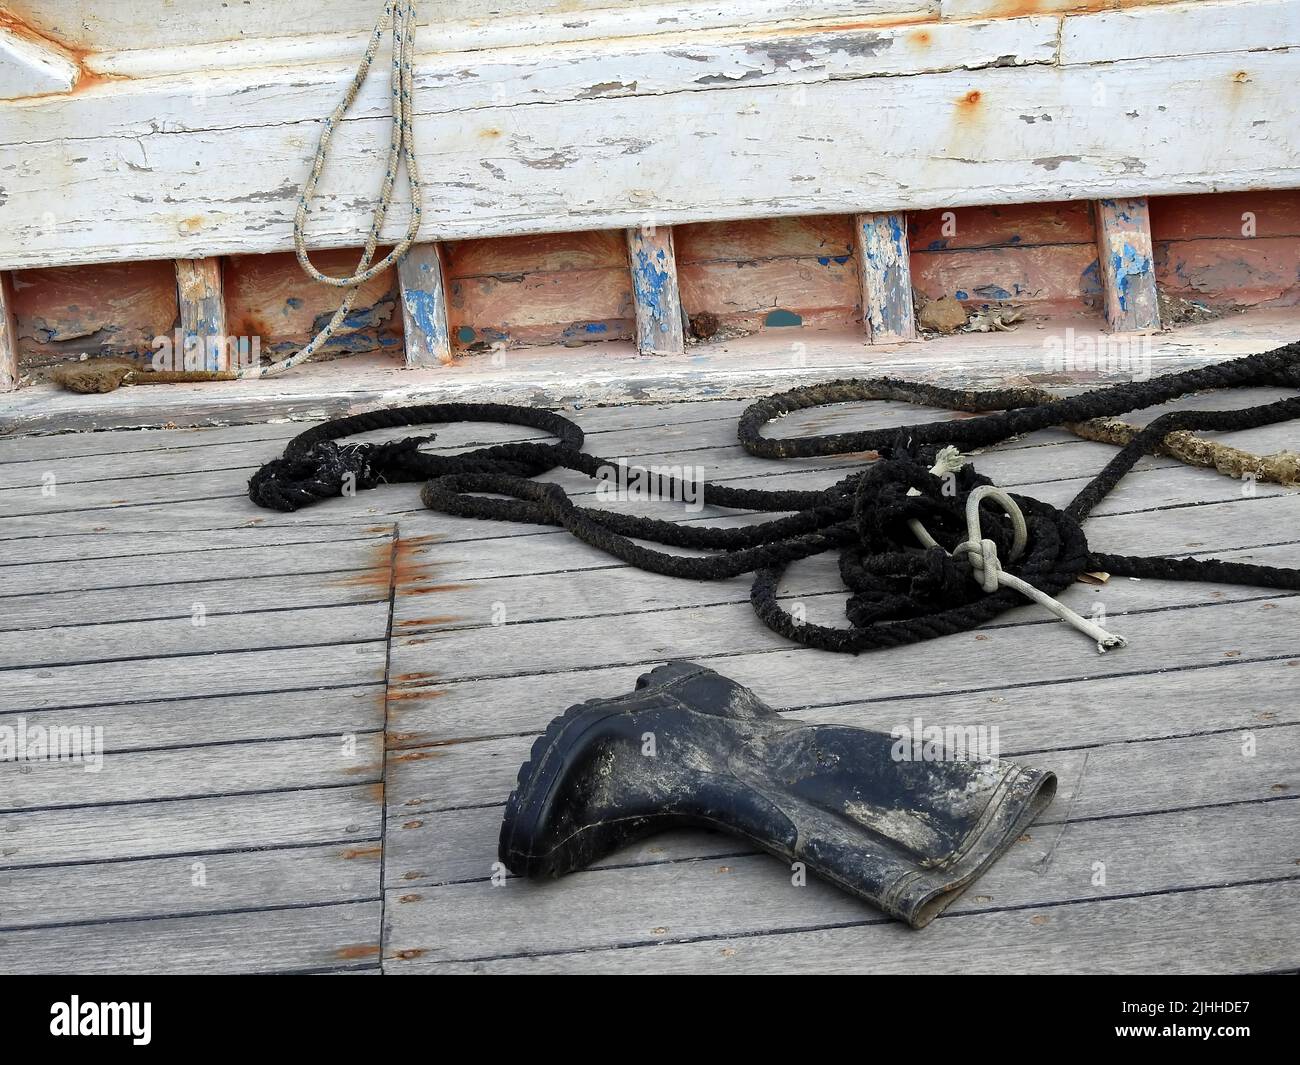 Ropes and rubber boots on the deck of fishing boat Stock Photo